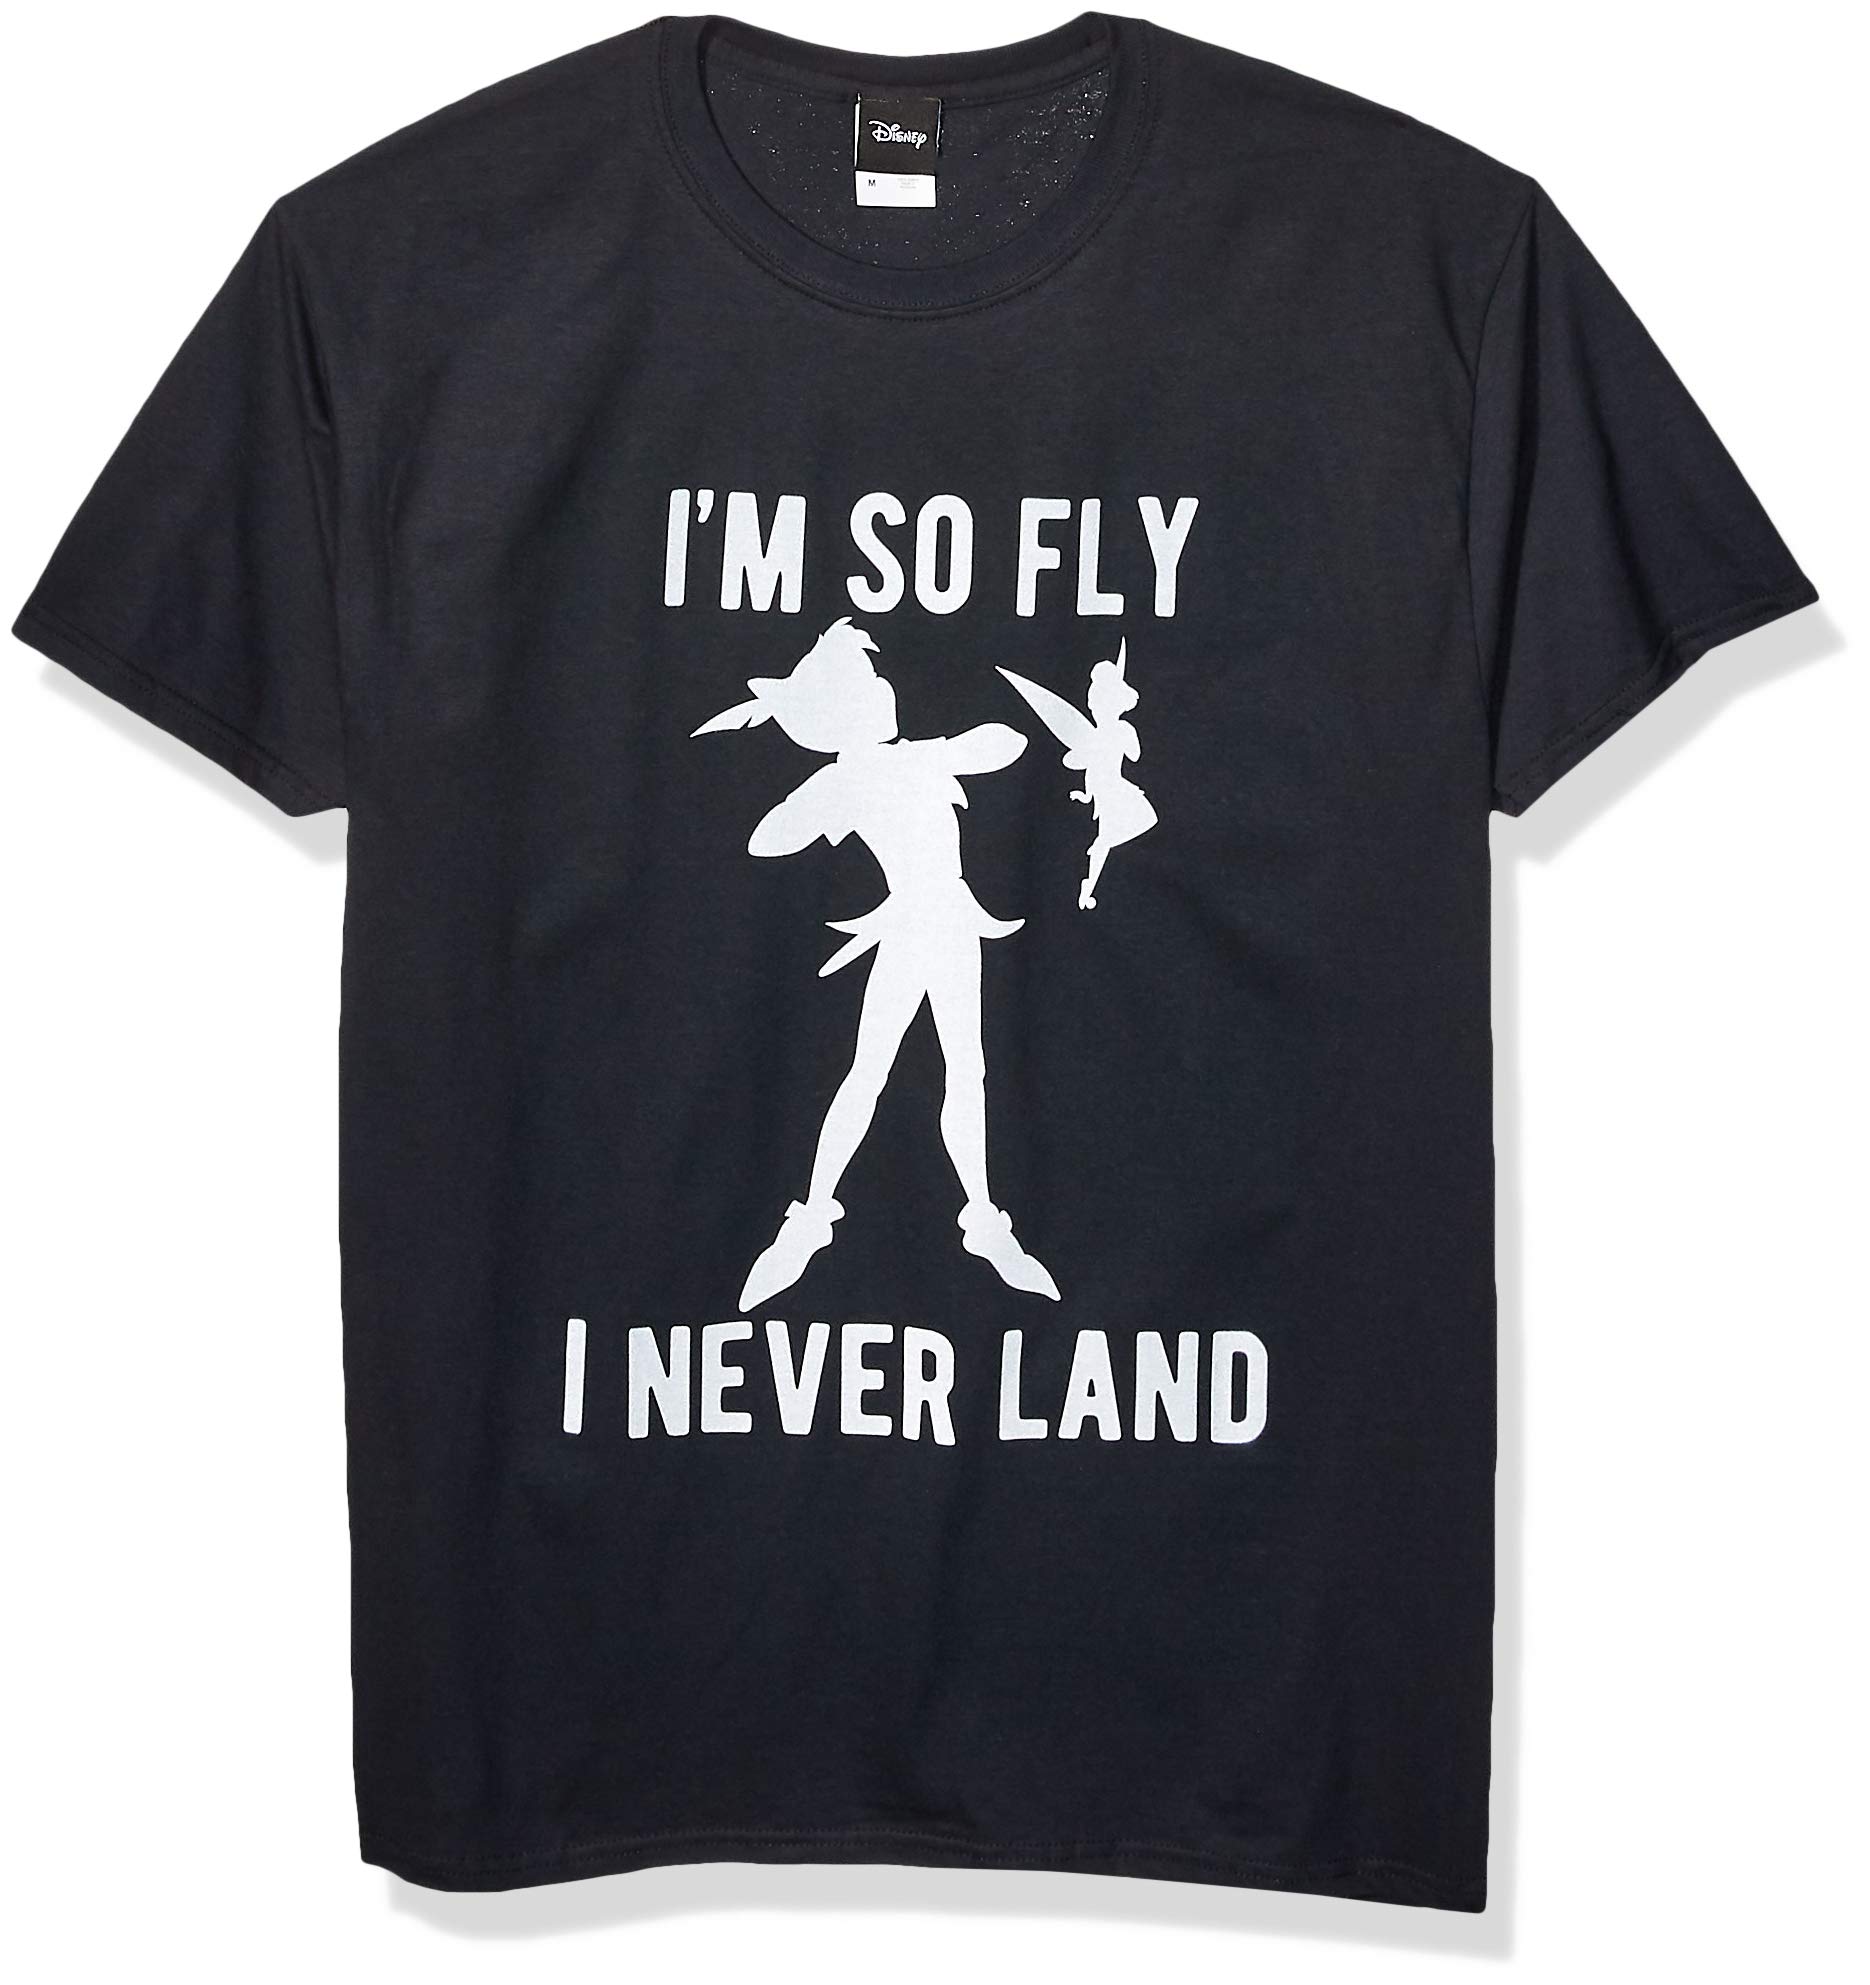 Disney Peter Pan Tinkerbell I'm So Fly I Neverland Graphic T-Shirt